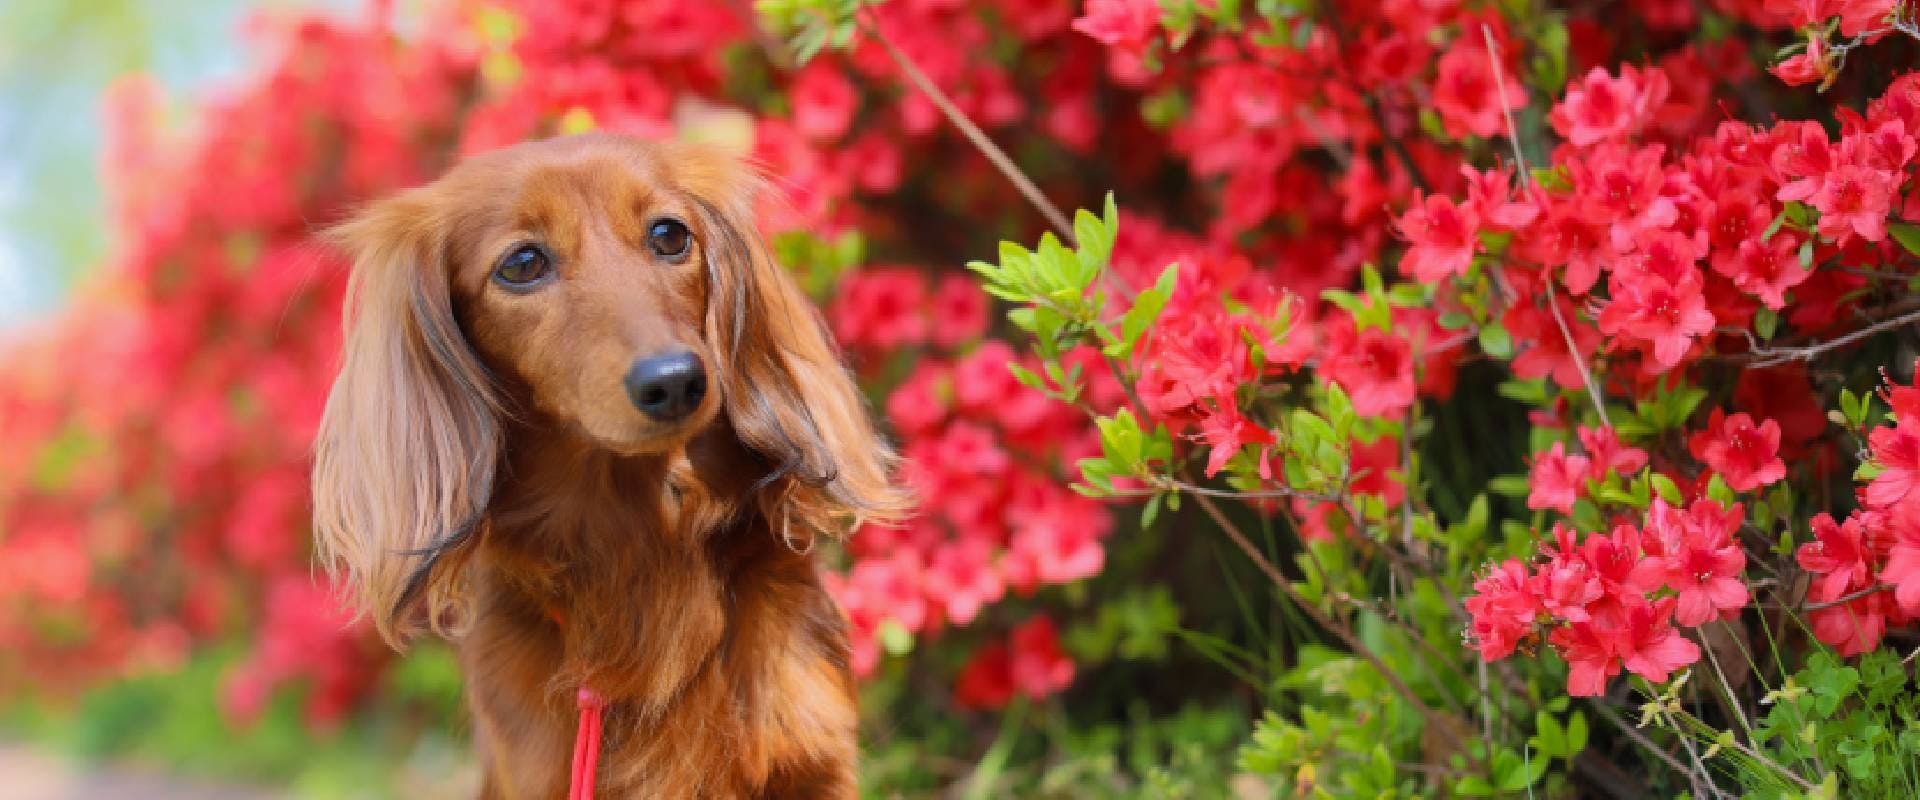 Dachshund sitting in front of a Rhododendron bush